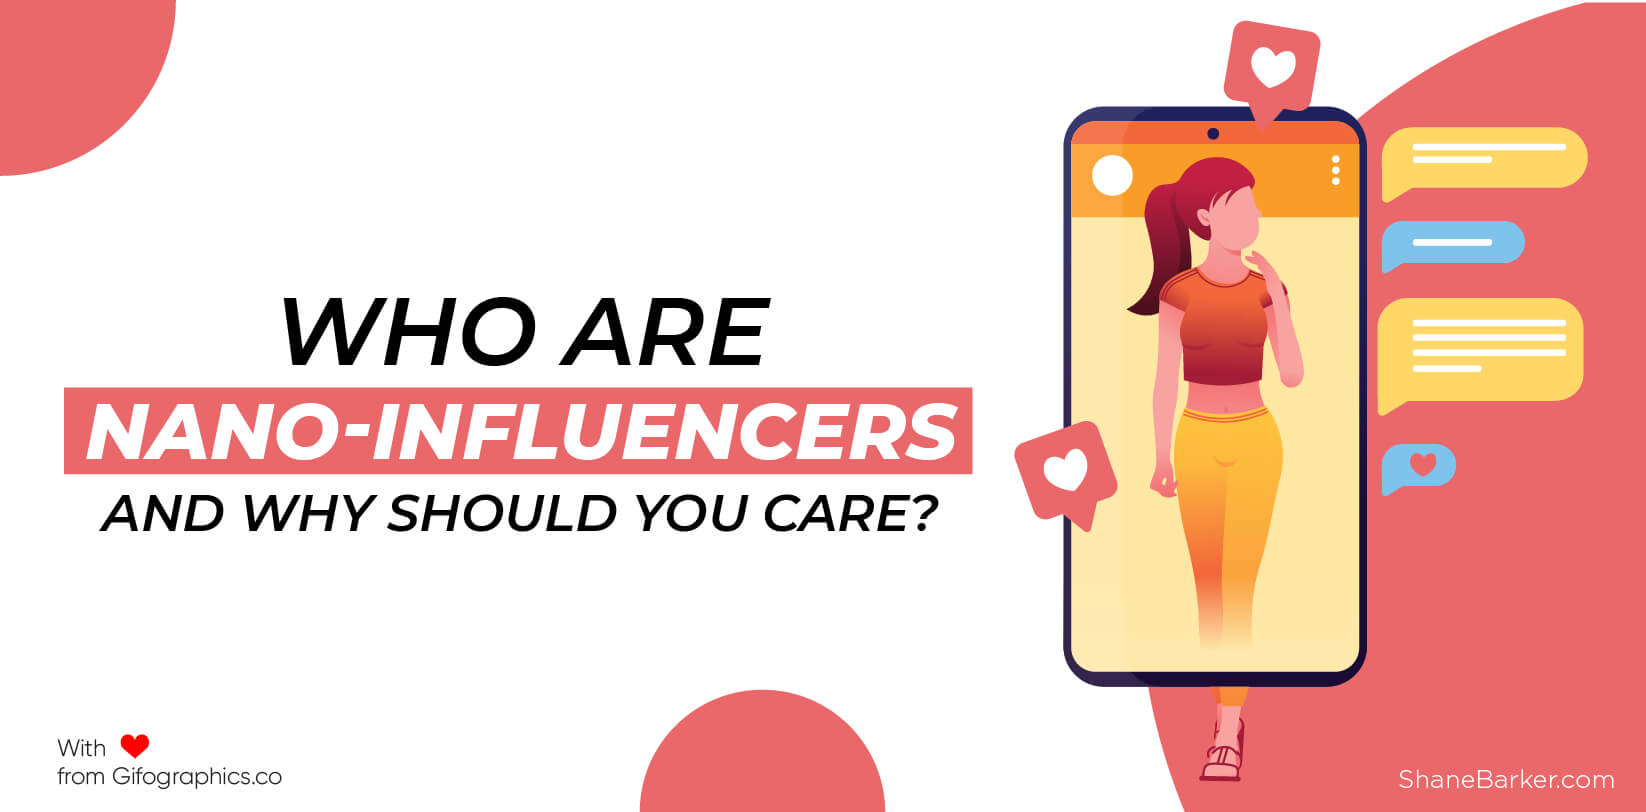 Who Are Nano-Influencers and Why Should You Care